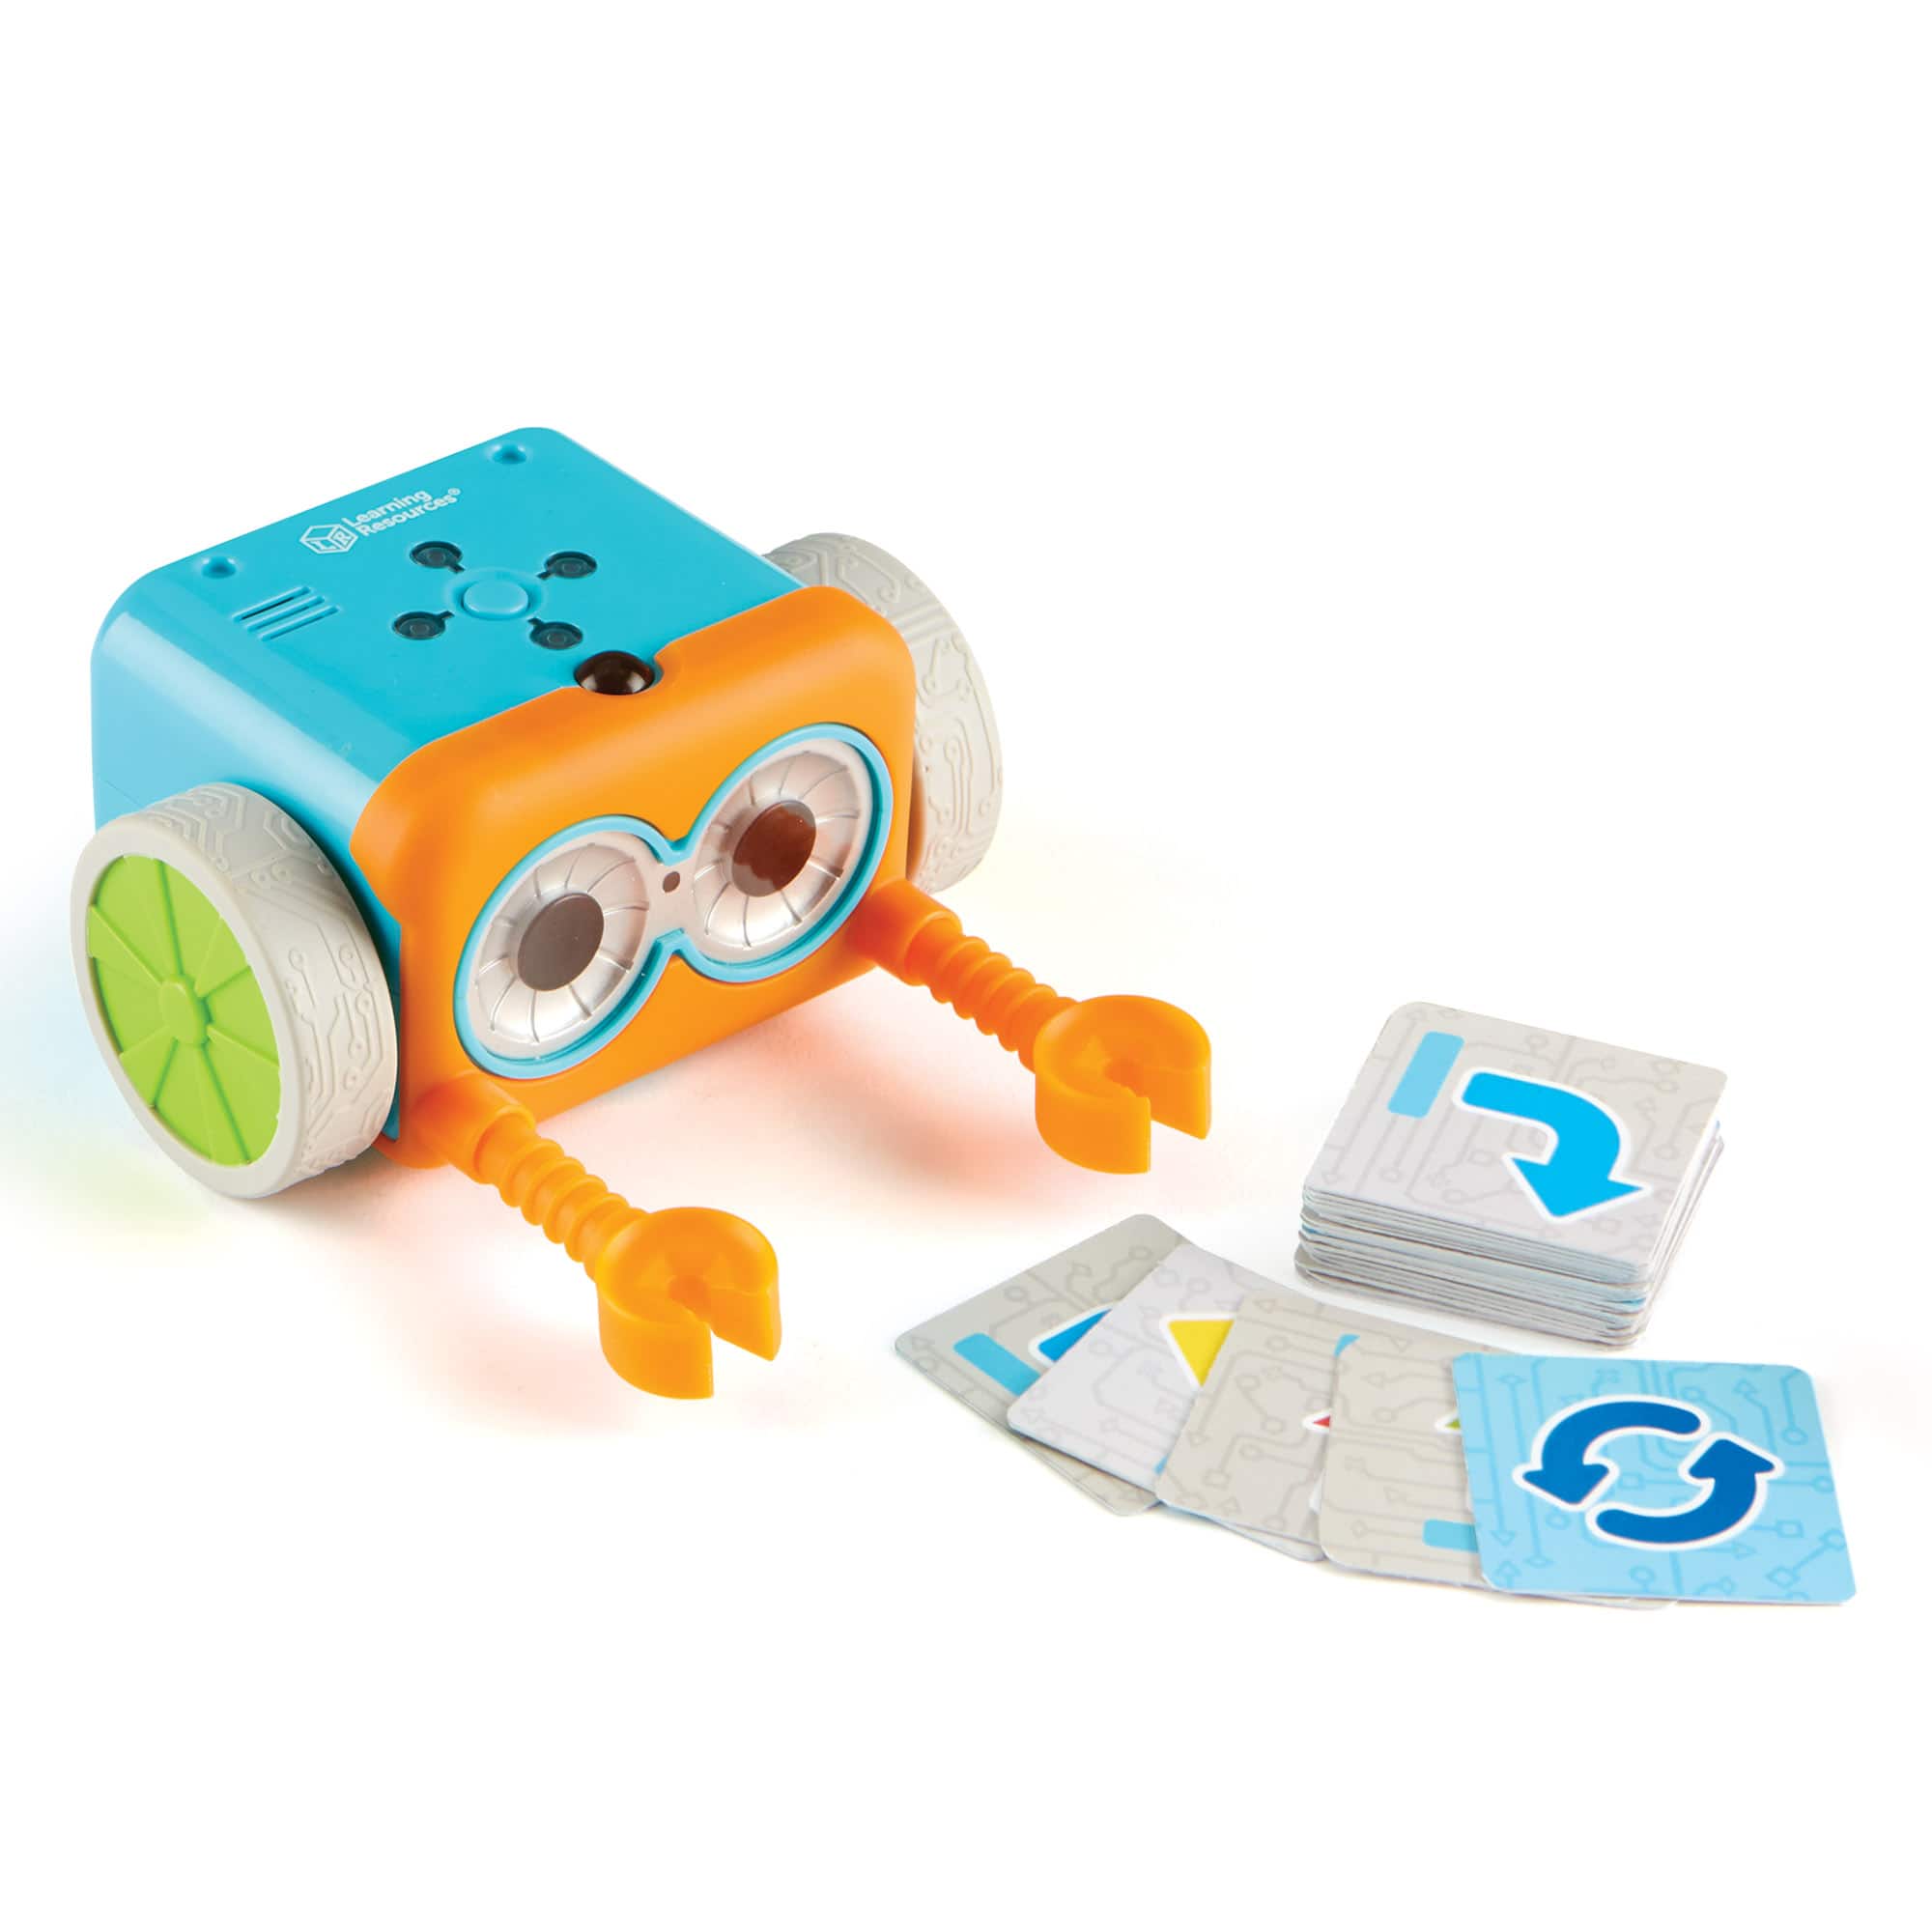 Botley The Coding Robot Accessory Set – That's My Robot